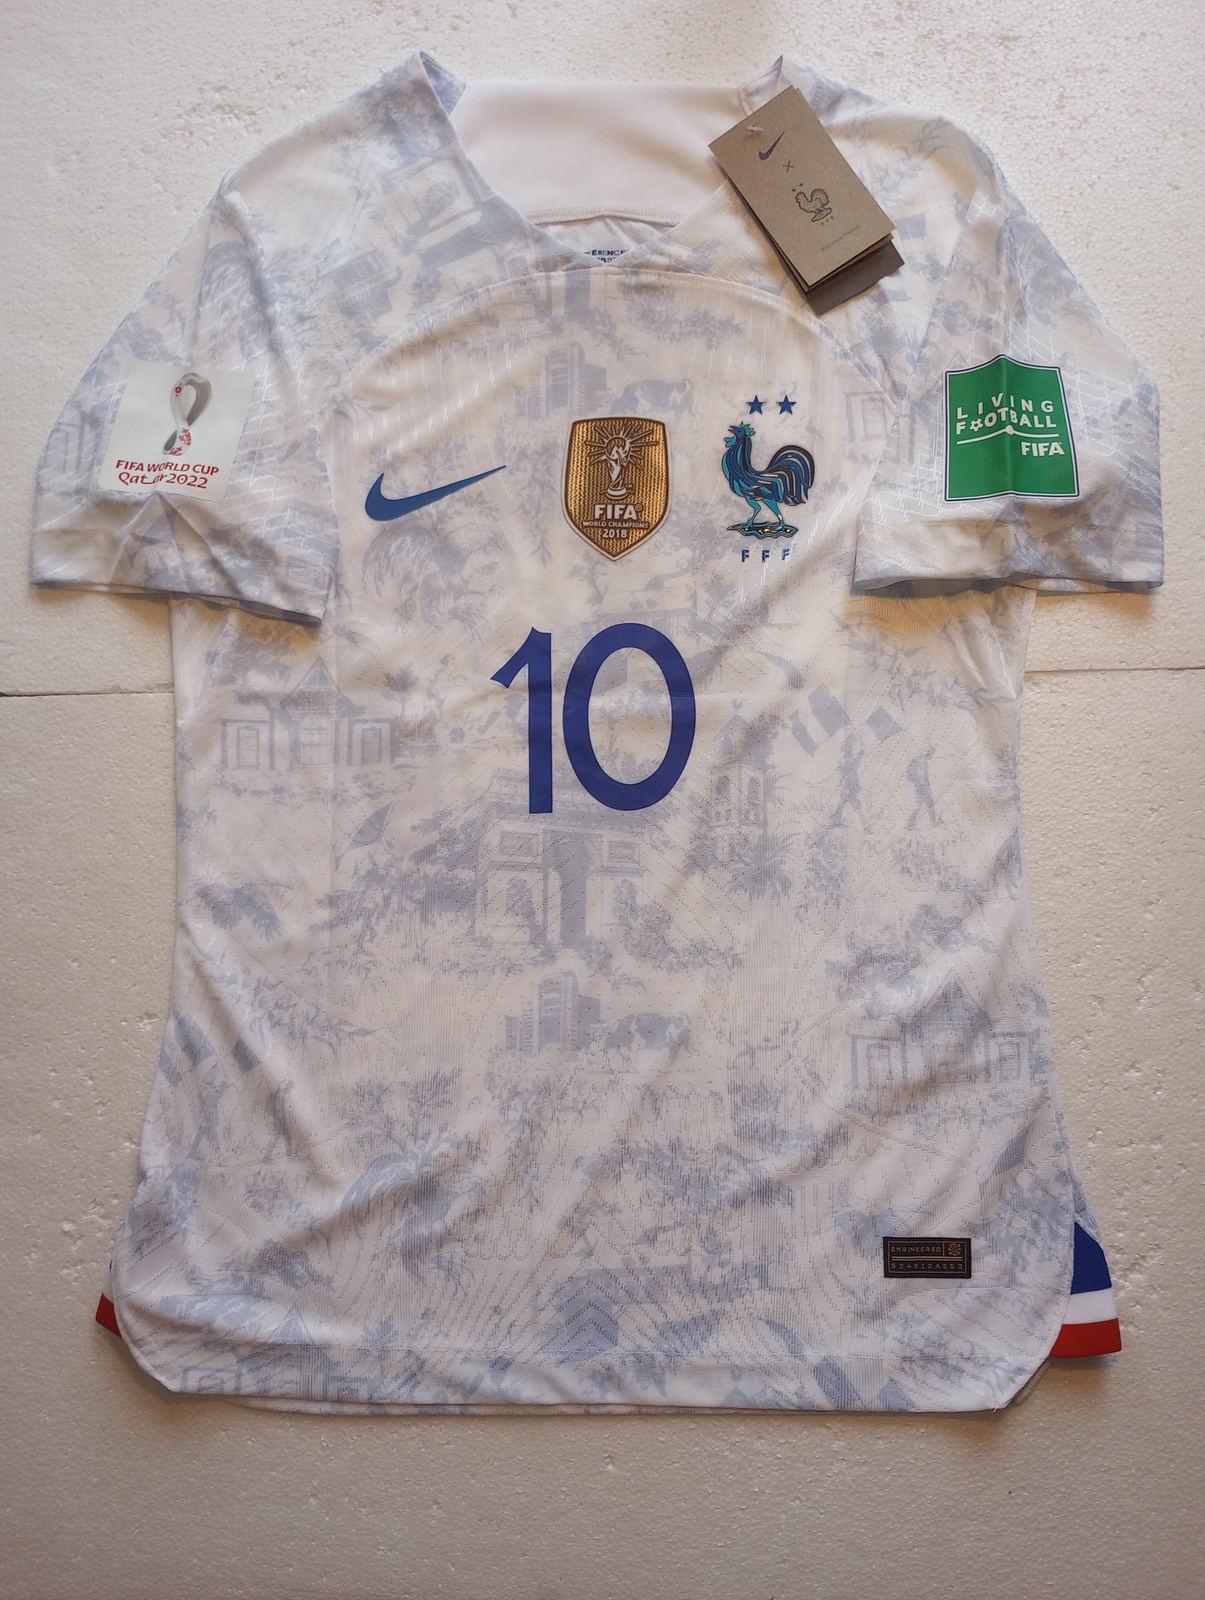 Kylian Mbappe France 2022 World Cup Qatar Match Slim White Home Soccer Jersey - $110.00